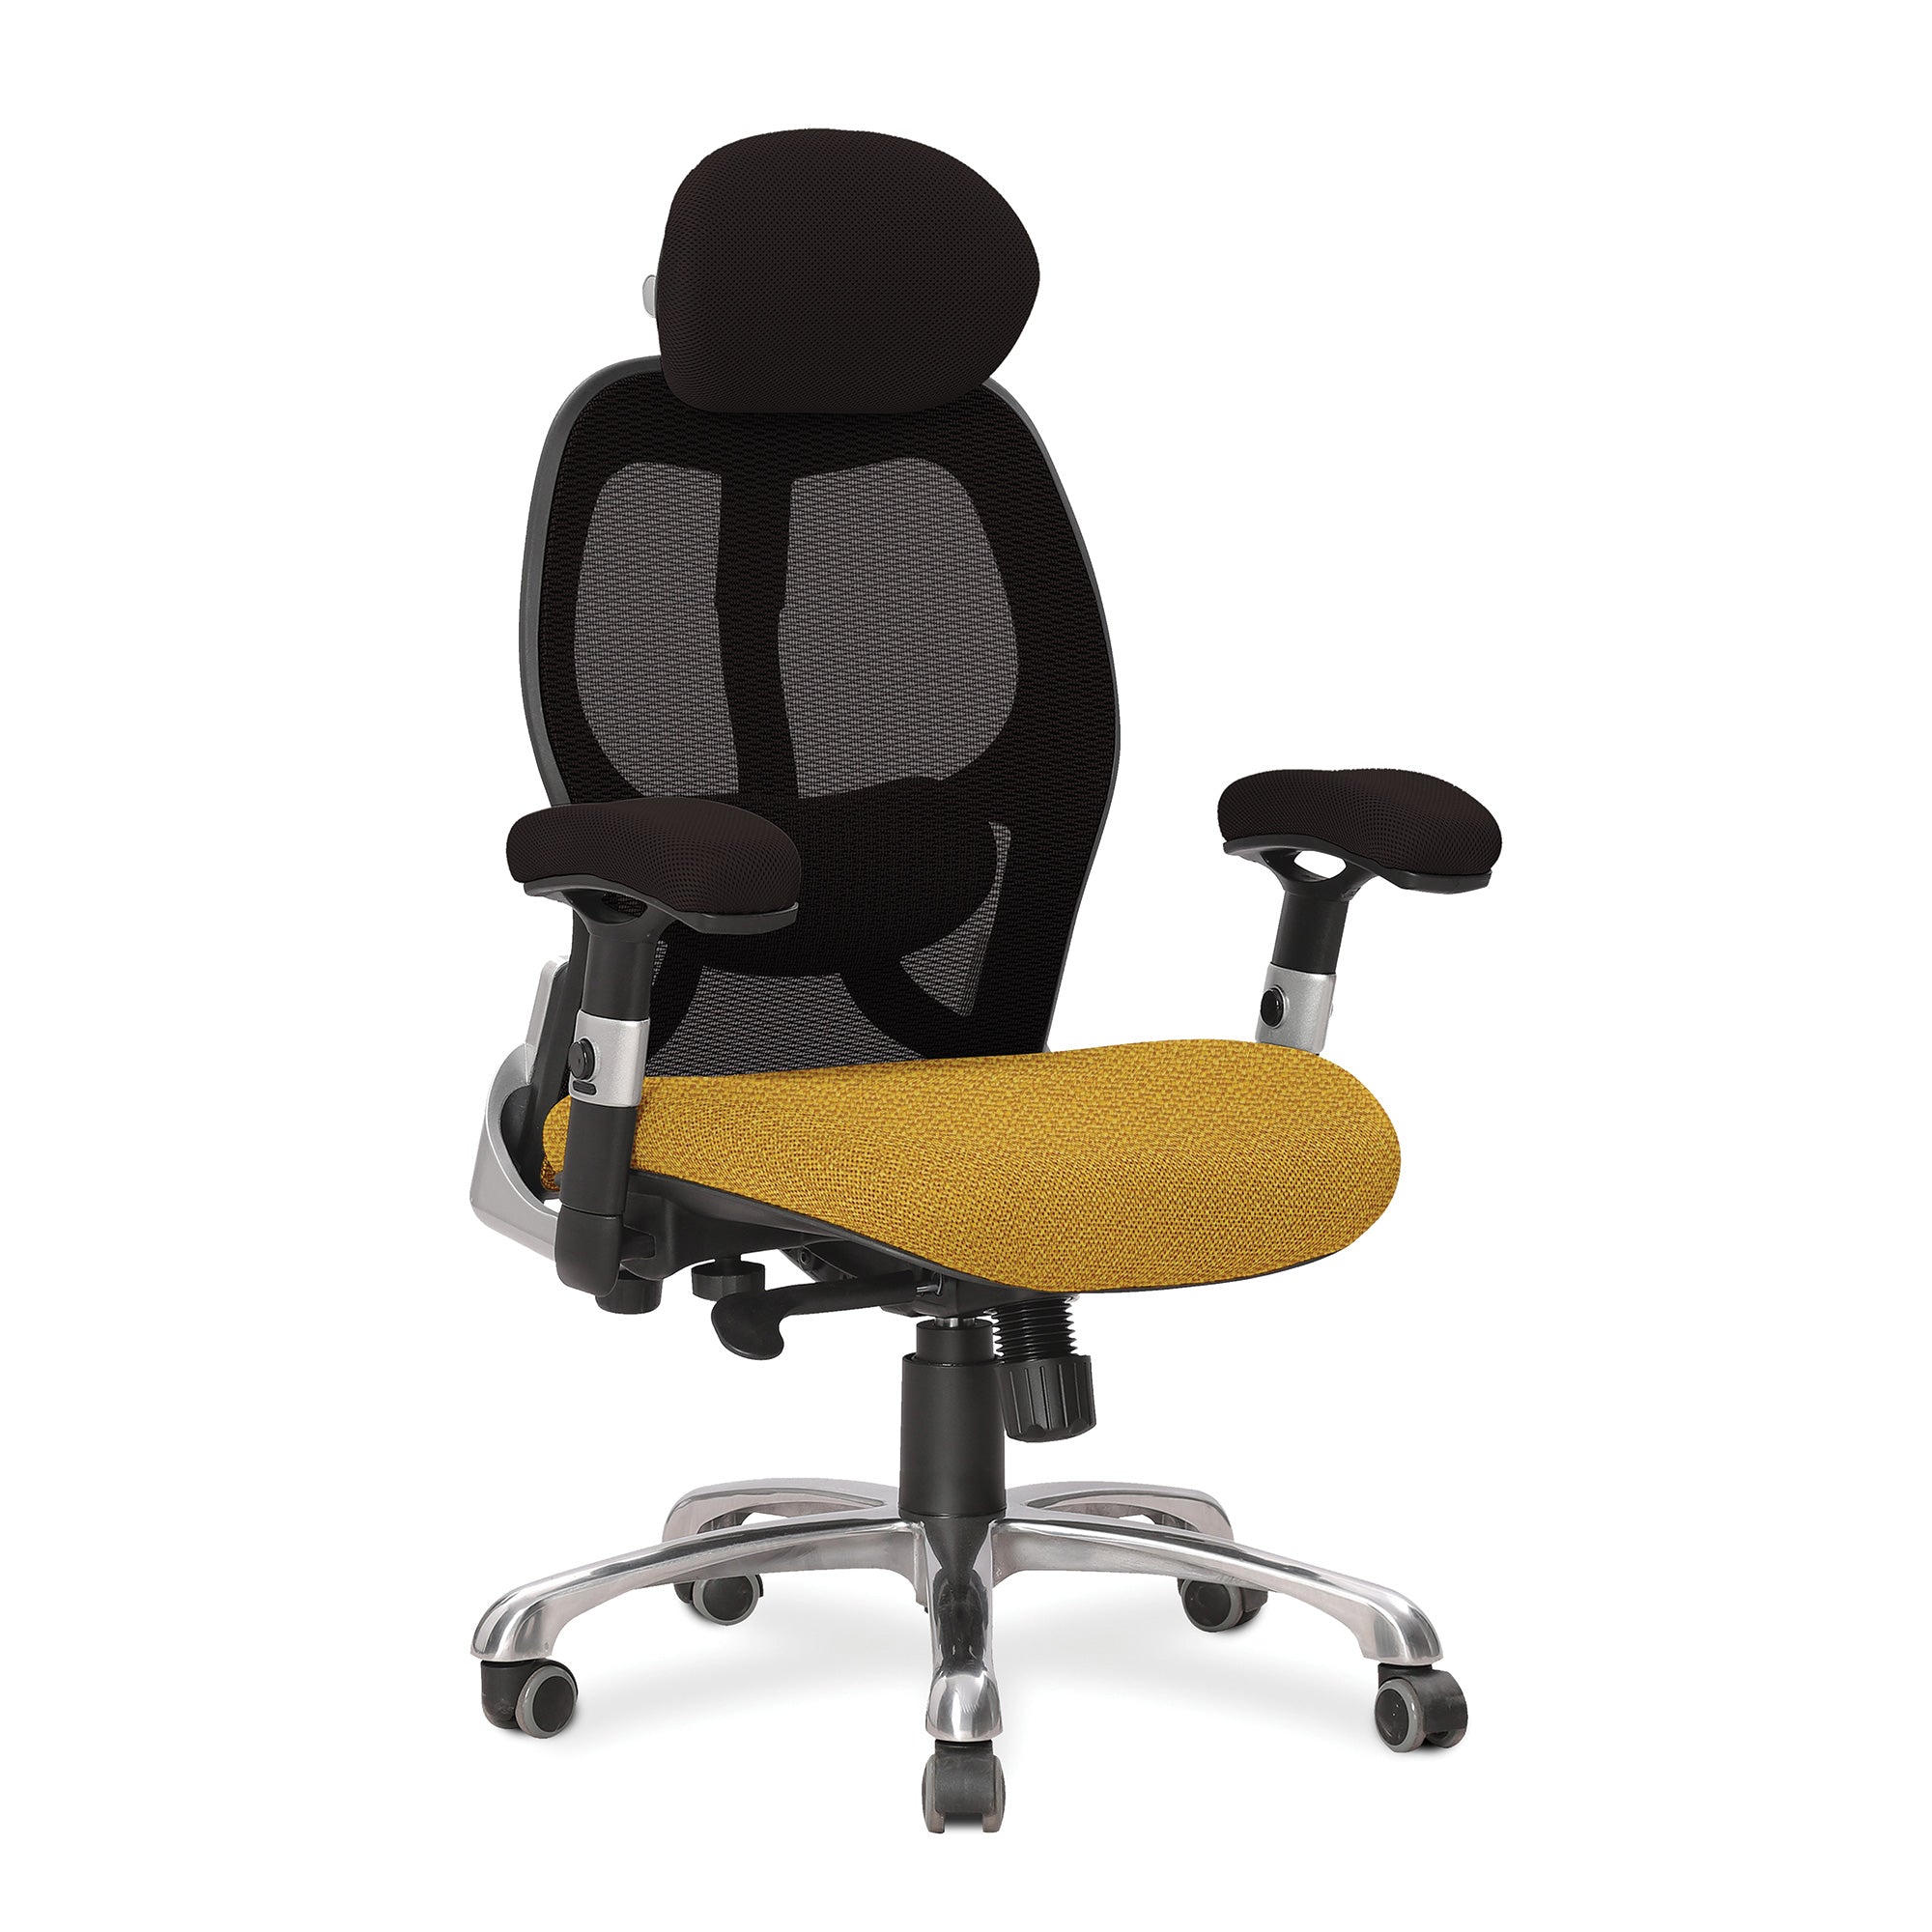 MADE TO ORDER - Ergo – Two Tone Ergonomic Luxury High Back Executive Mesh Chair with Chrome Base Certified for 24 Hour Use